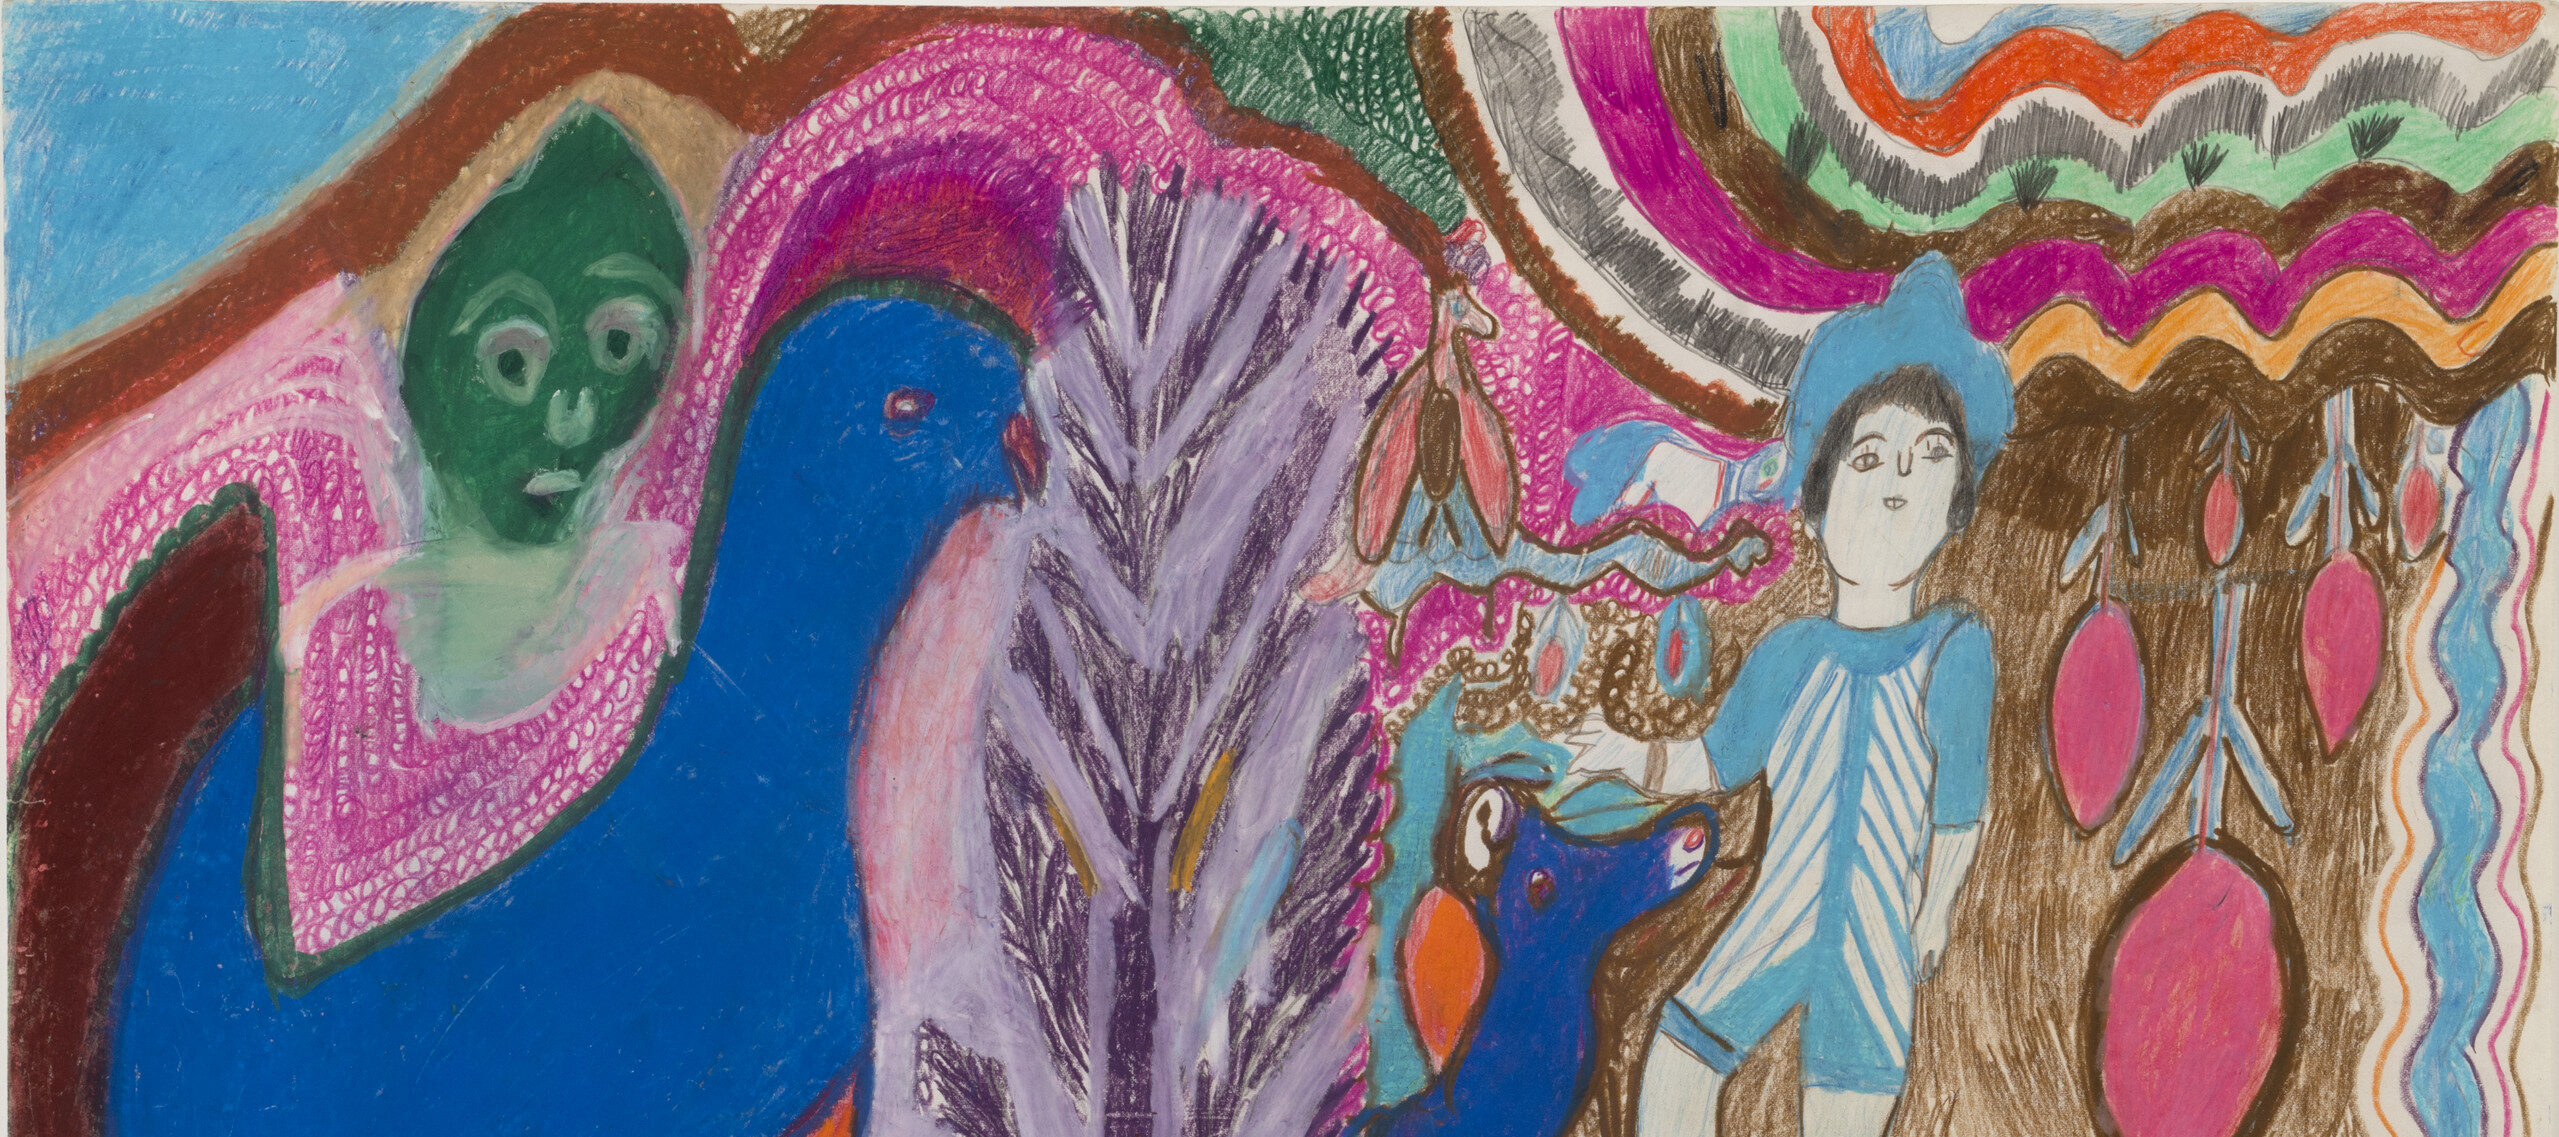 A vividly colored drawing of multiple elements including a large blue bird at the left, over which hovers a green face. In the center is a purple tree.To the right are a black donkey, a figure dressed in light blue stripes and a dark blue dog.